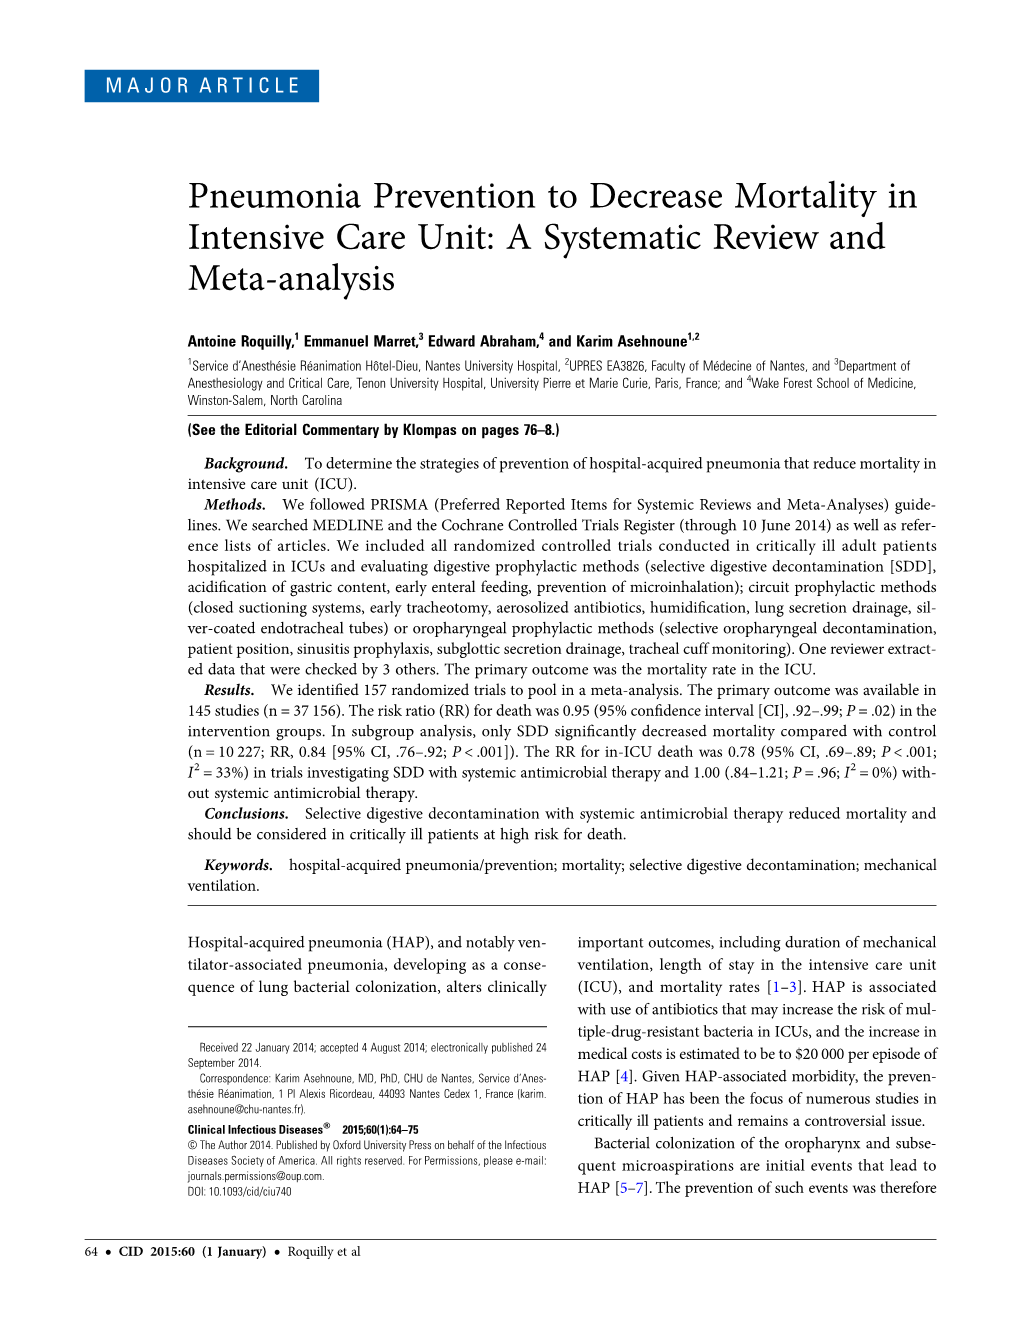 Pneumonia Prevention to Decrease Mortality in Intensive Care Unit: a Systematic Review and Meta-Analysis